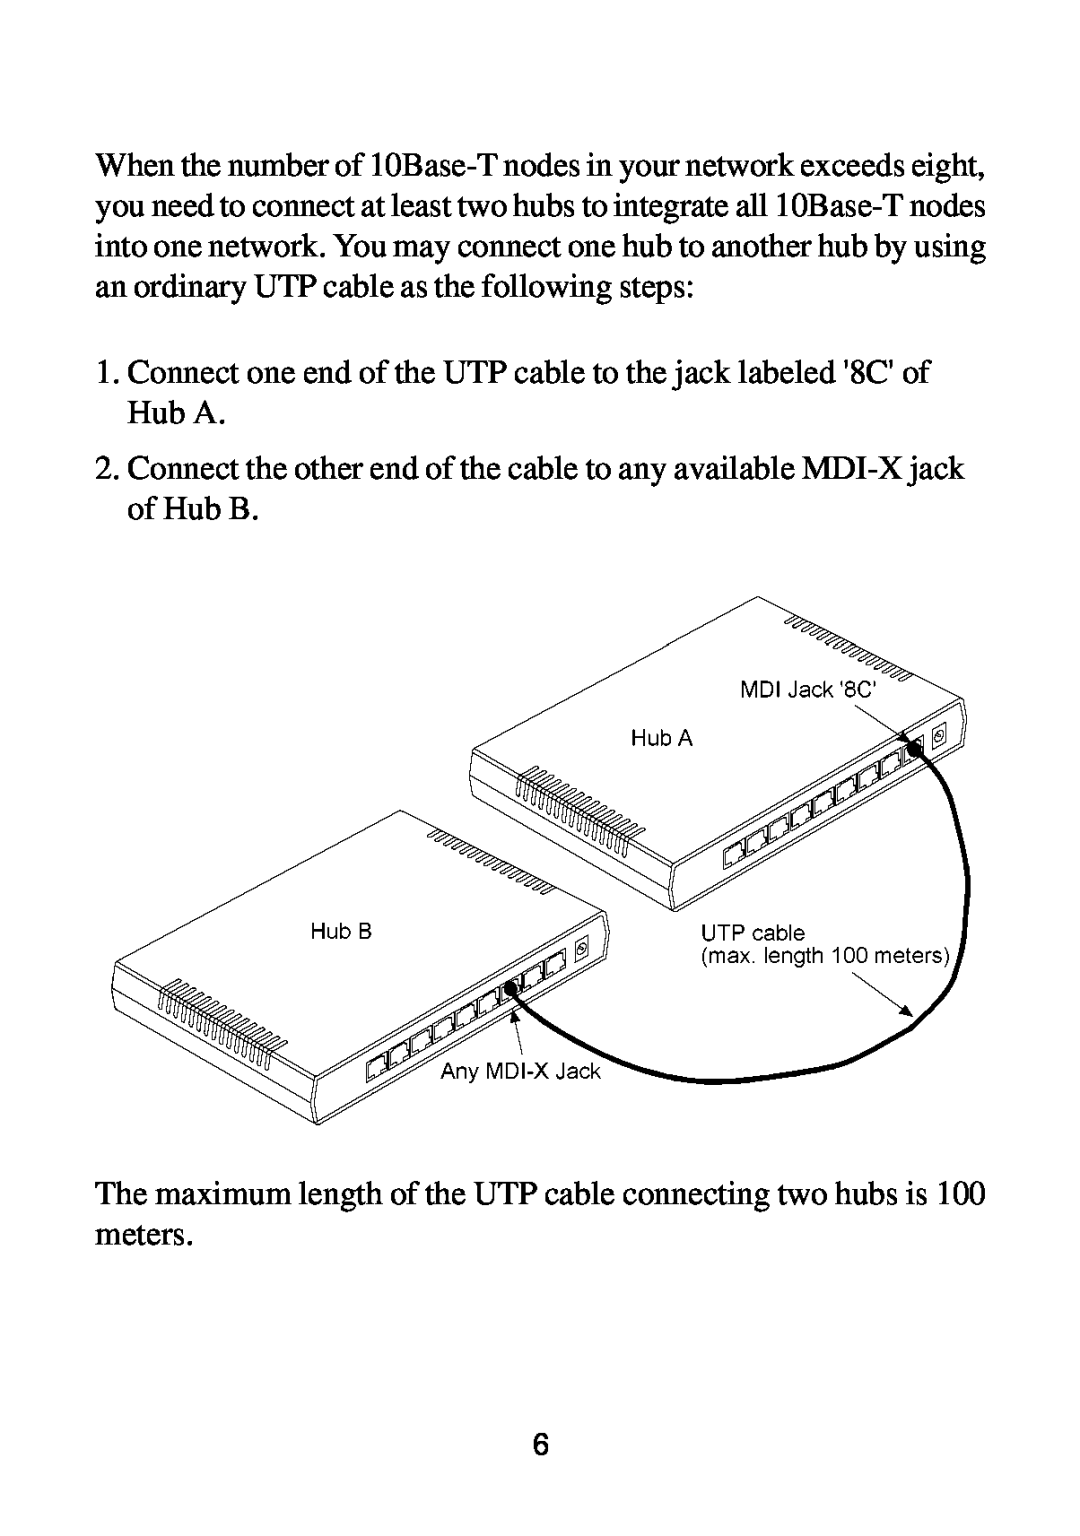 KTI Networks DH-8T manual Connect one end of the UTP cable to the jack labeled 8C of Hub A 